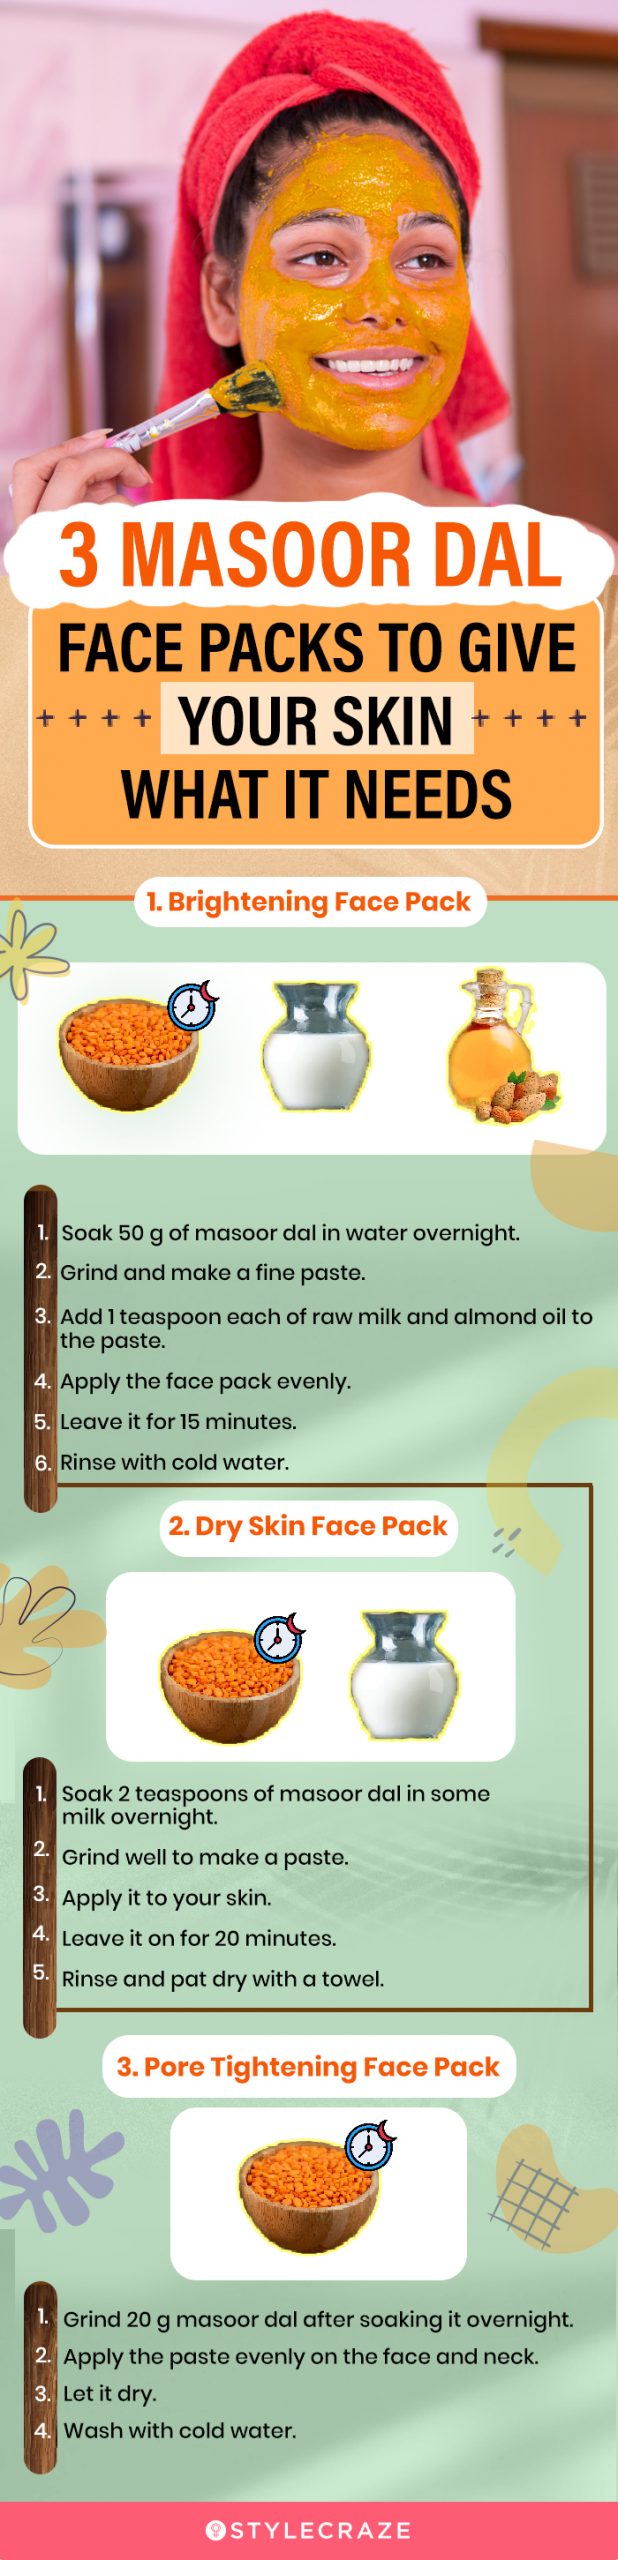 3 masoor dal face packs to give your skin what it needs (infographic)